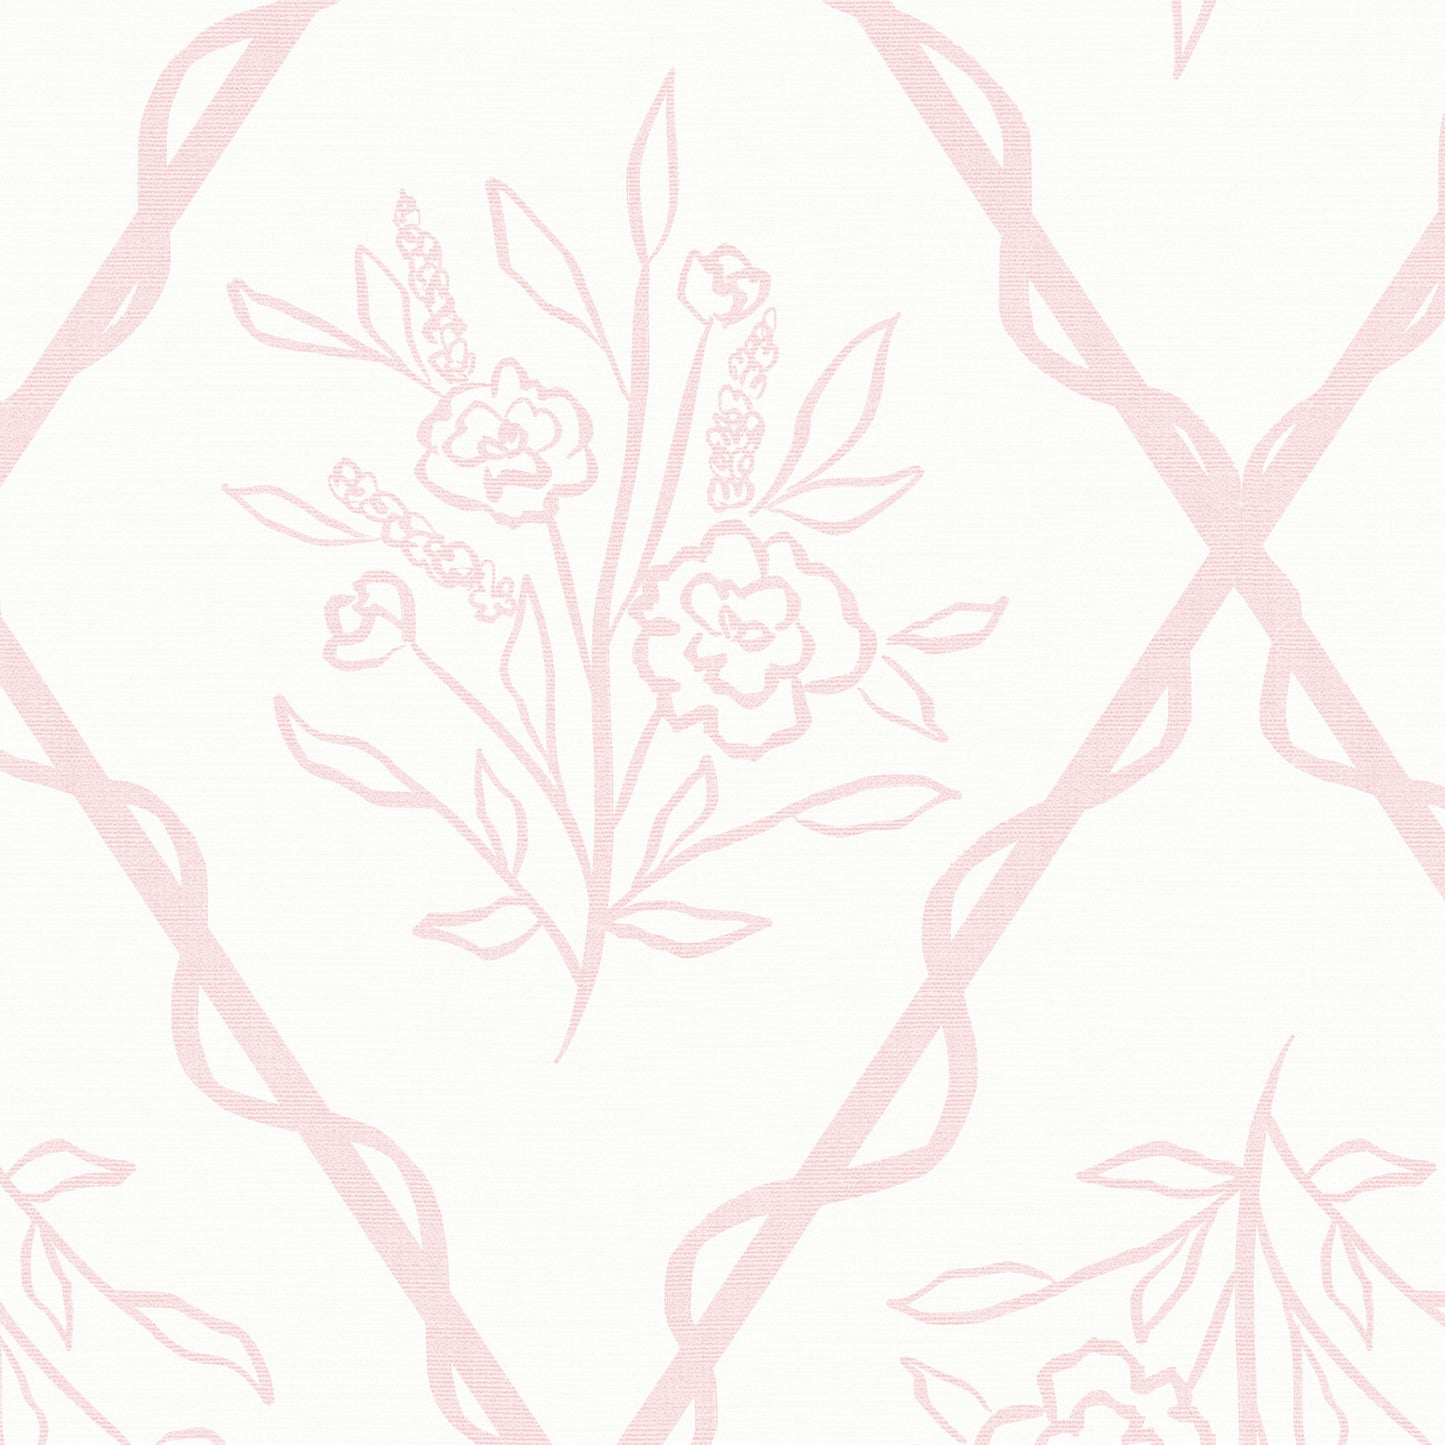 Close up Nursery wallpaper featuring Jessica's Floral Trellis Wallpaper- a classic floral pattern